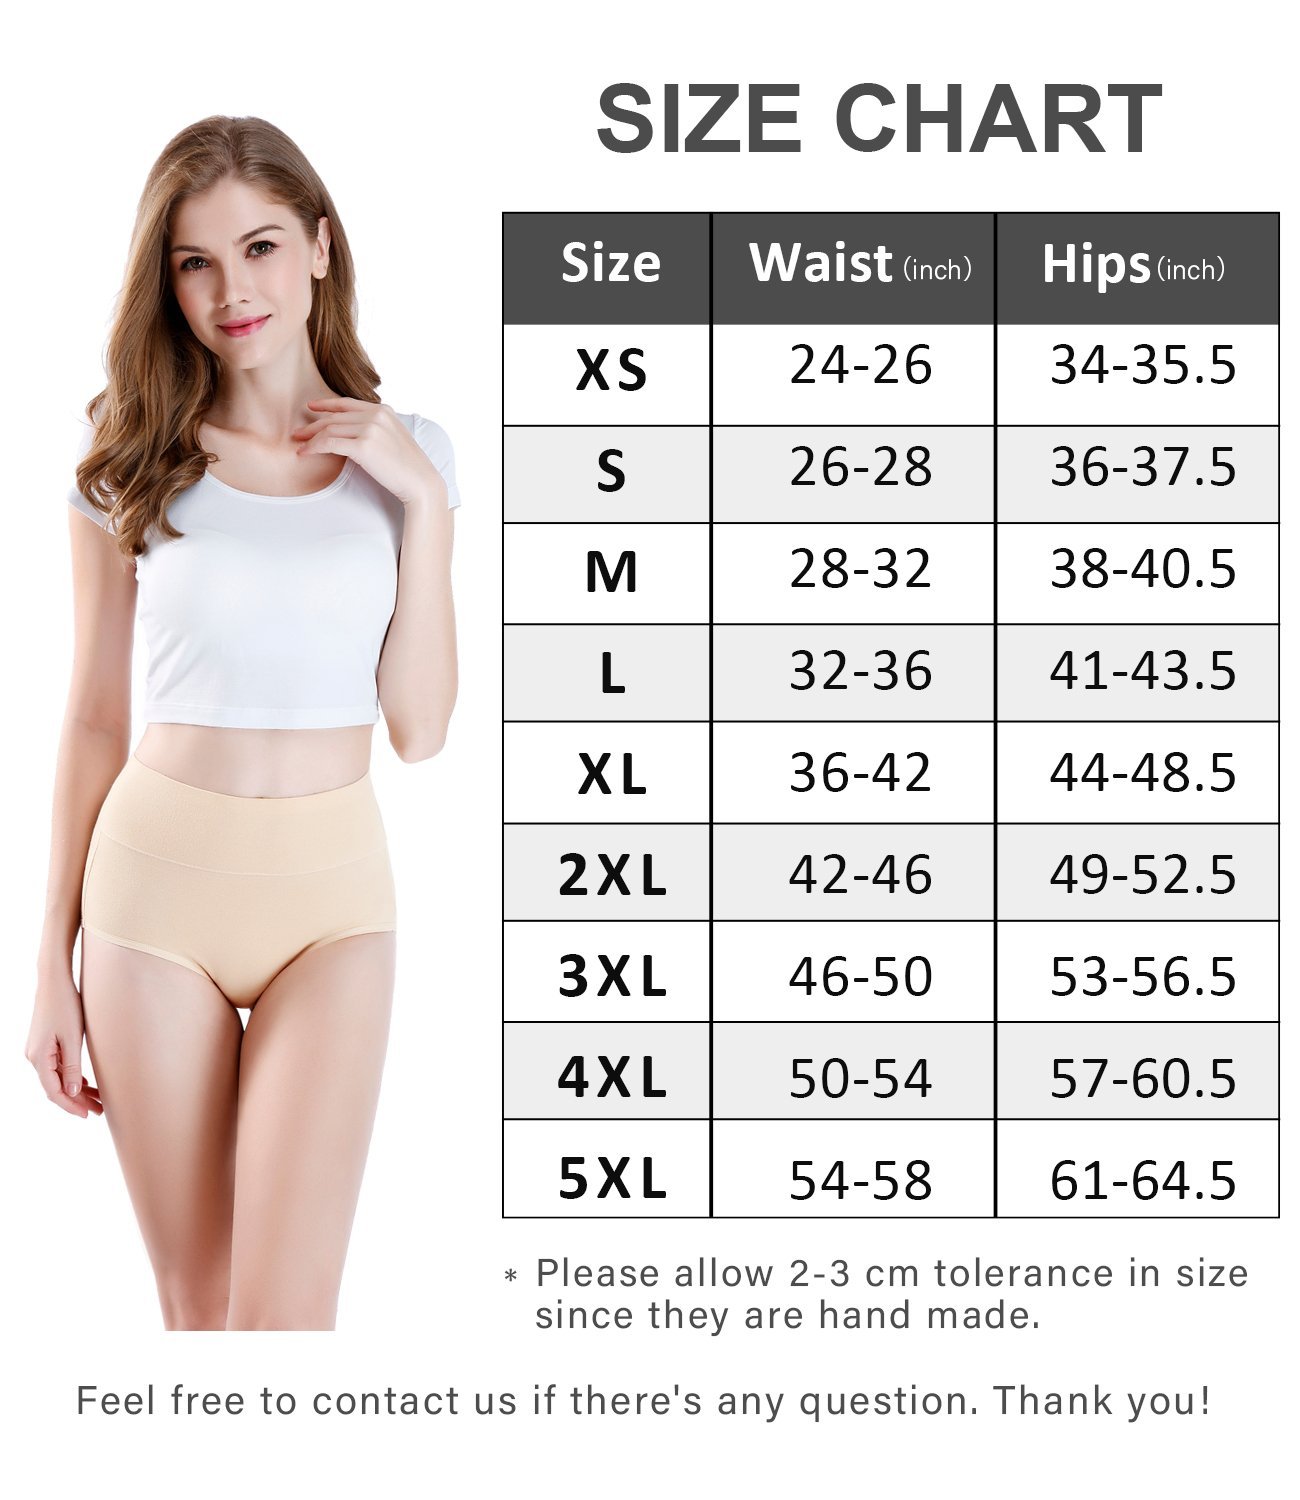  Warm Sun Womens Bamboo Viscose Fiber Multi Pack Plus Size  Stretchy Soft Breathable High Middle Waist Panties Size S-3XL